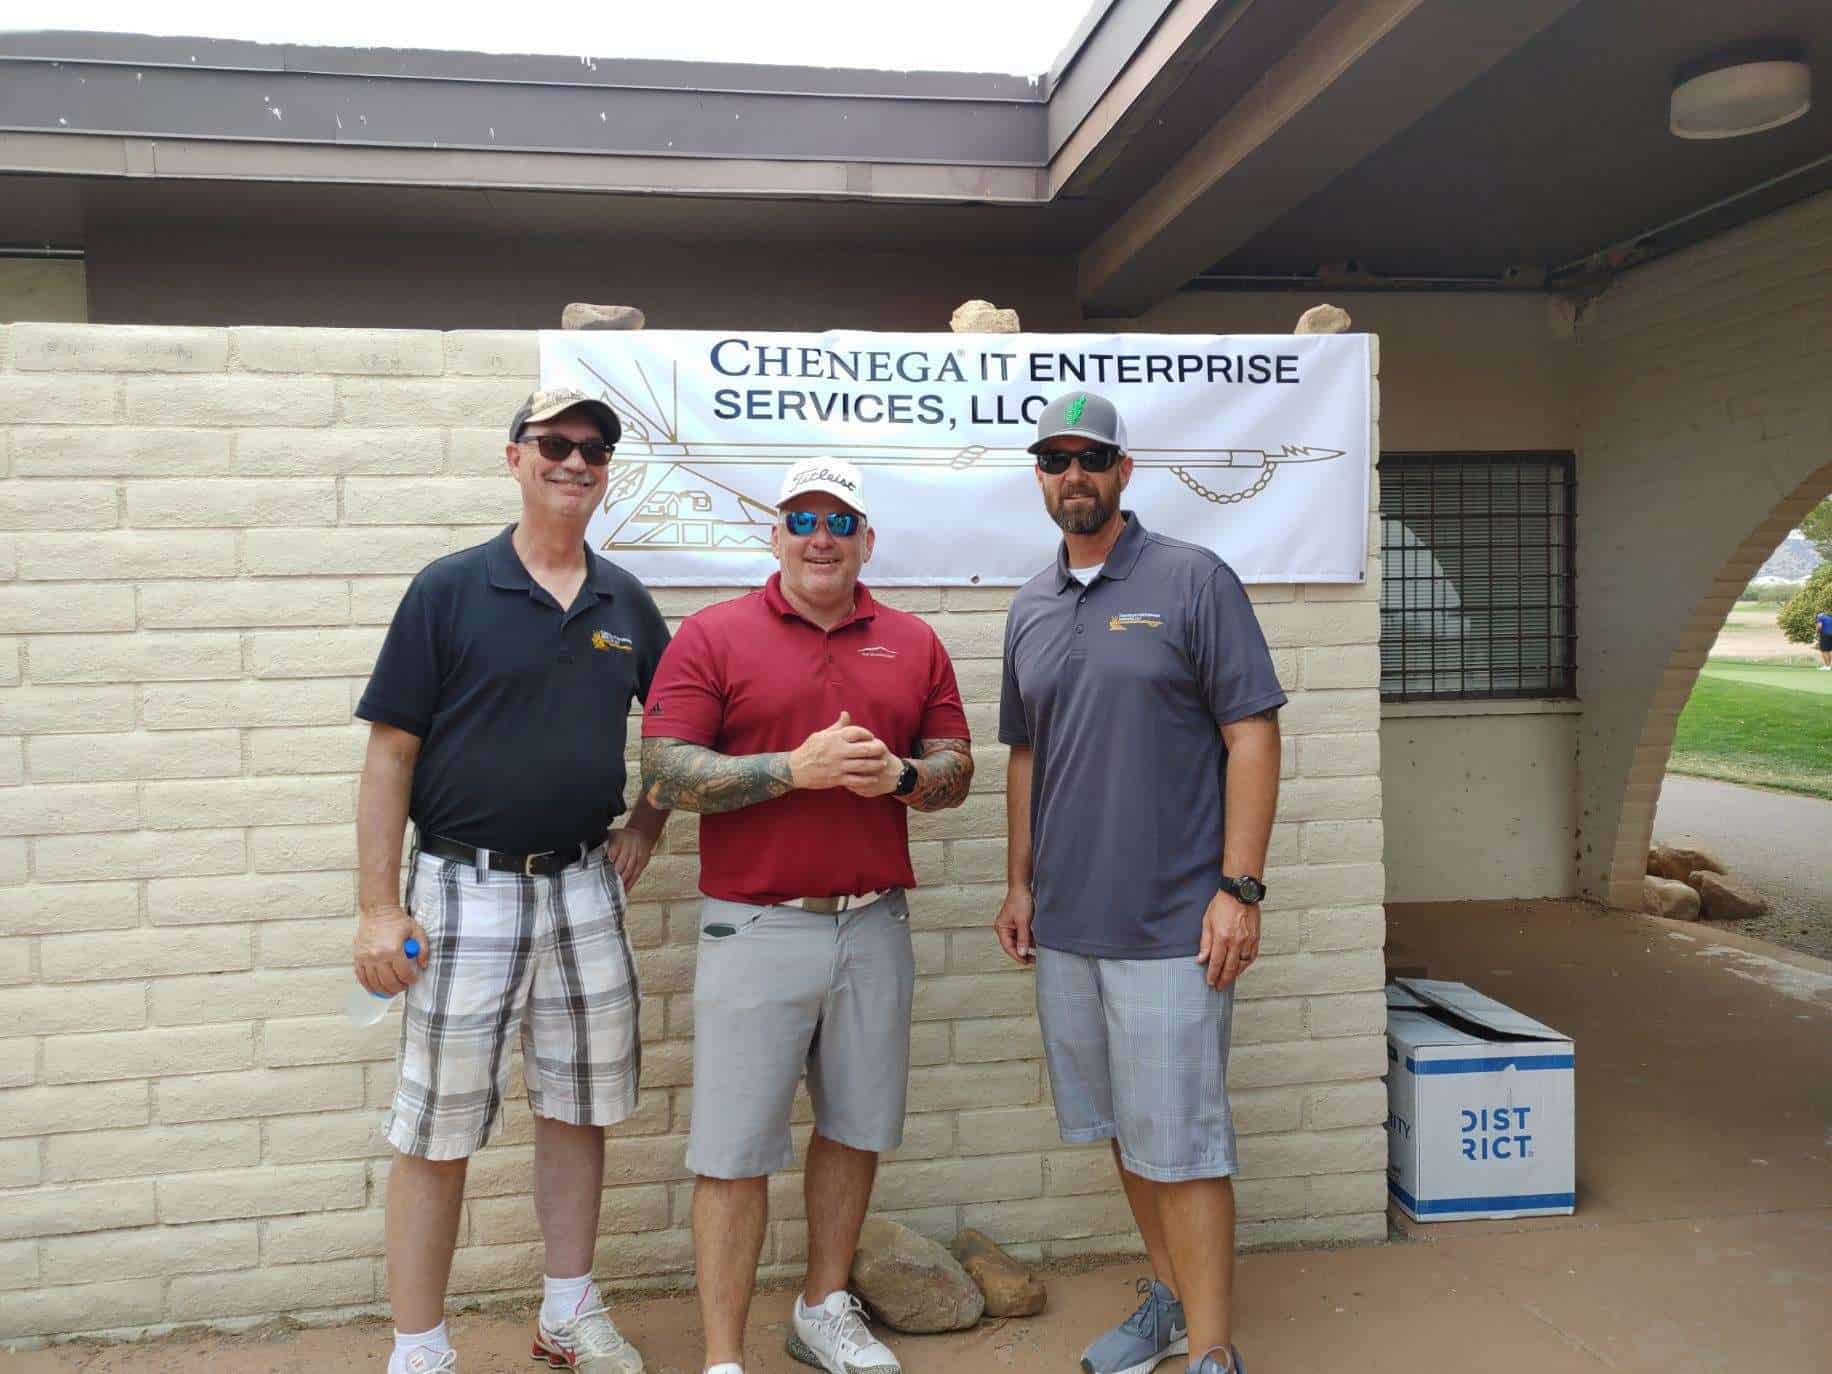 CITES Sponsors The Knowlton Award At The 2021 MICA HOF Golf Tournament